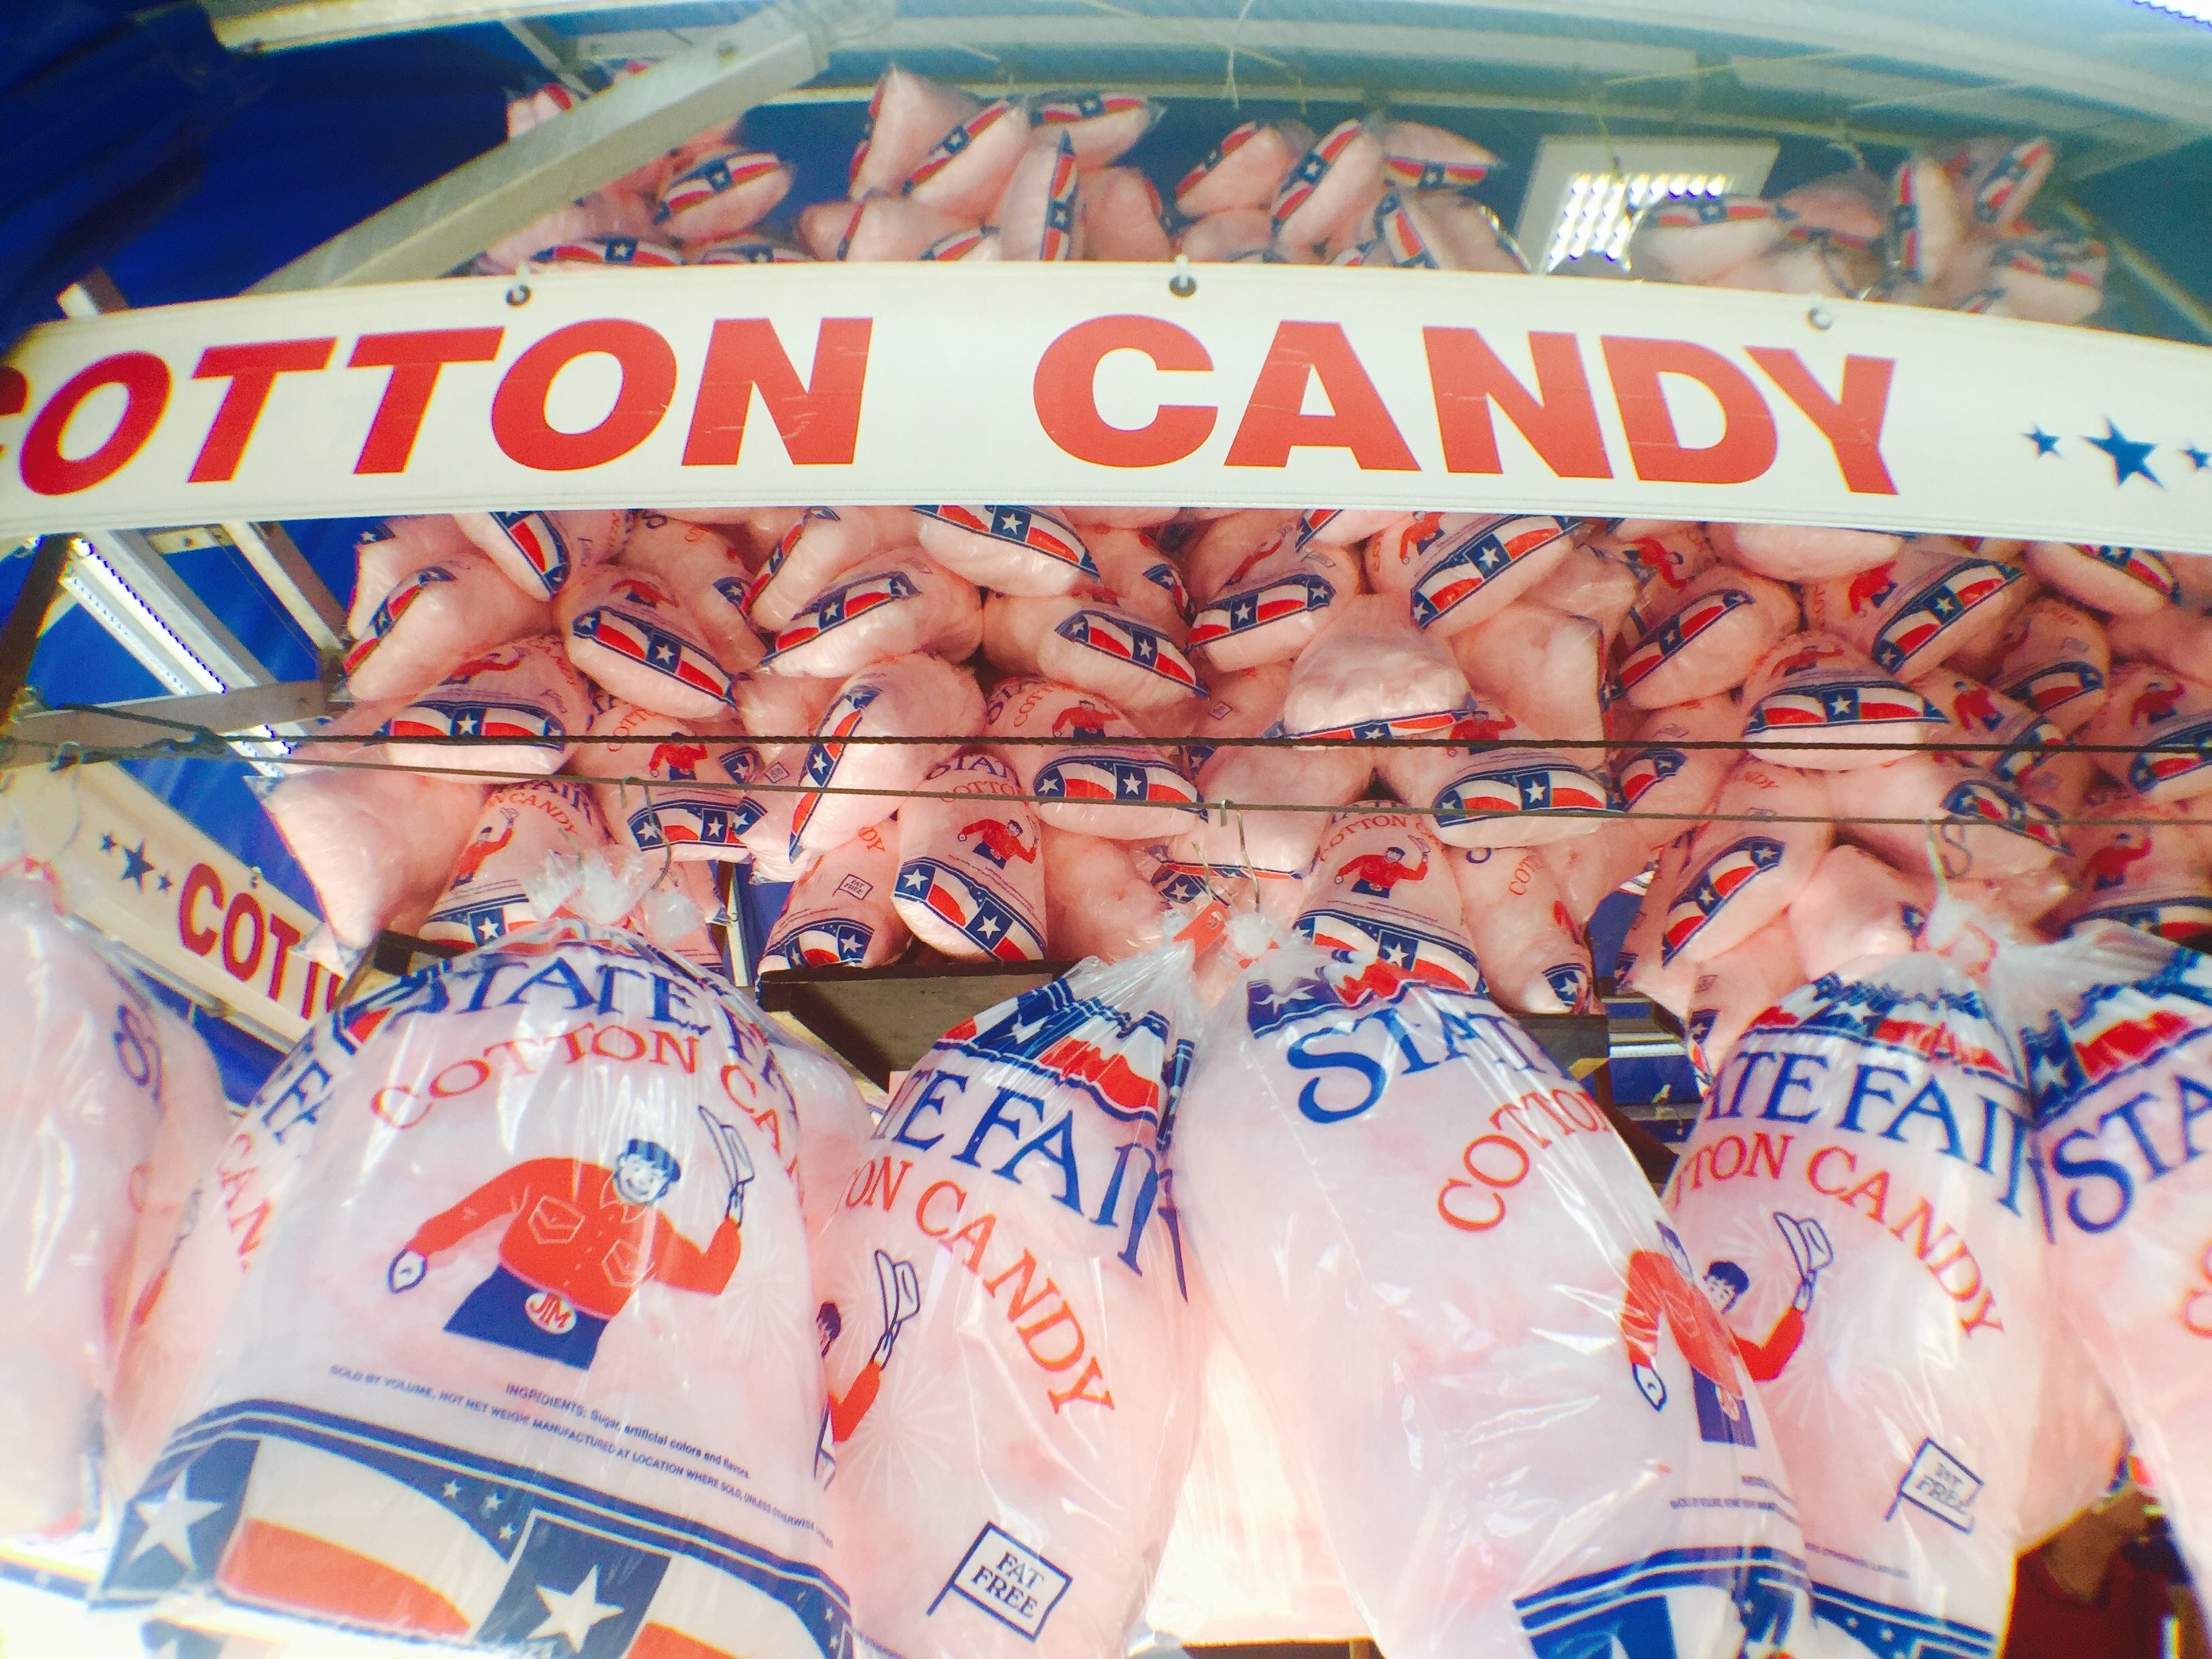 Bags of cotton candy are seen hanging on a vendor cart at the State Fair of Texas